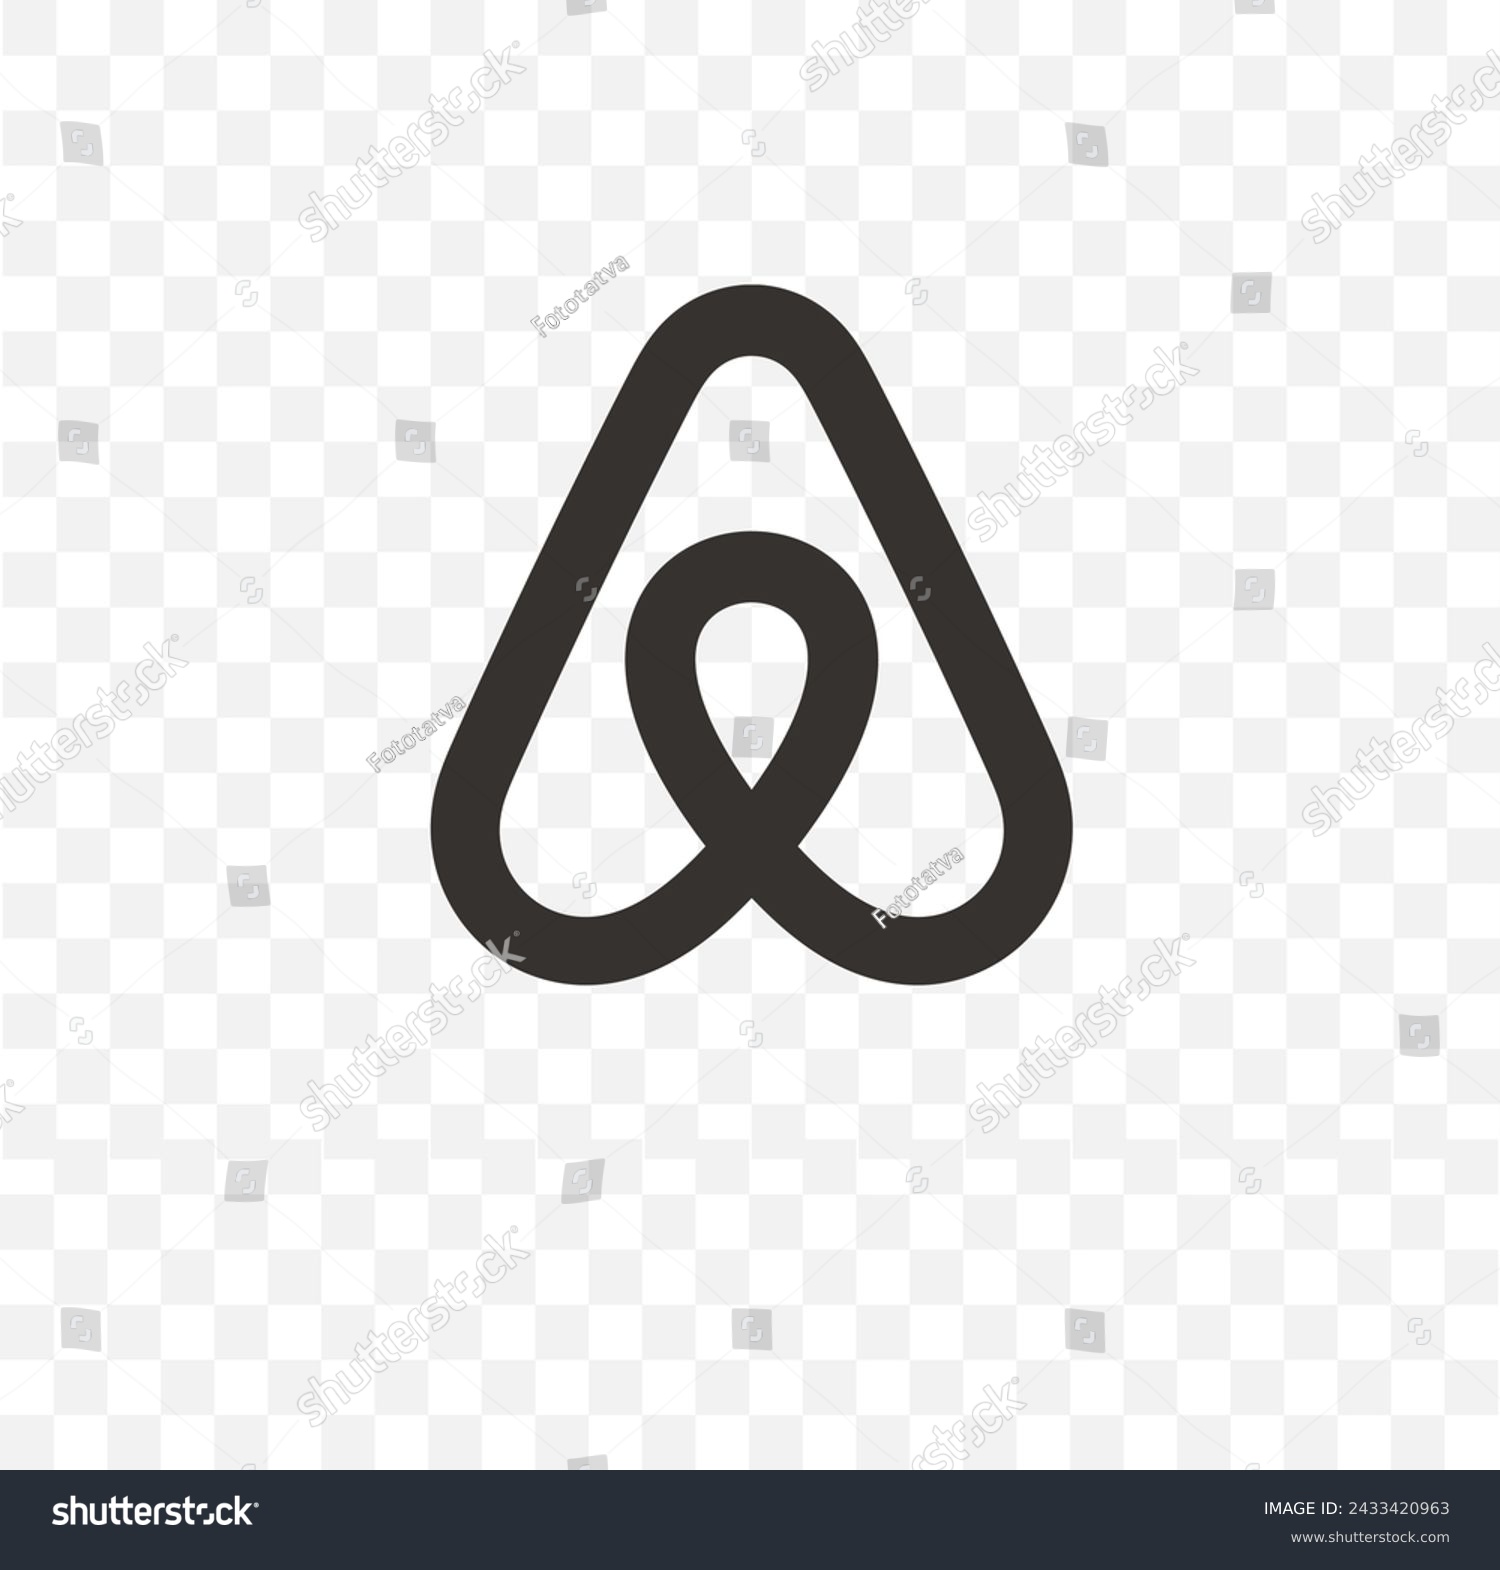 SVG of Airbnb black icon, isolated icons, icons for apps and websites, Vector illustrations, icons for business, education, social media, technology, communications, flat icons, services svg